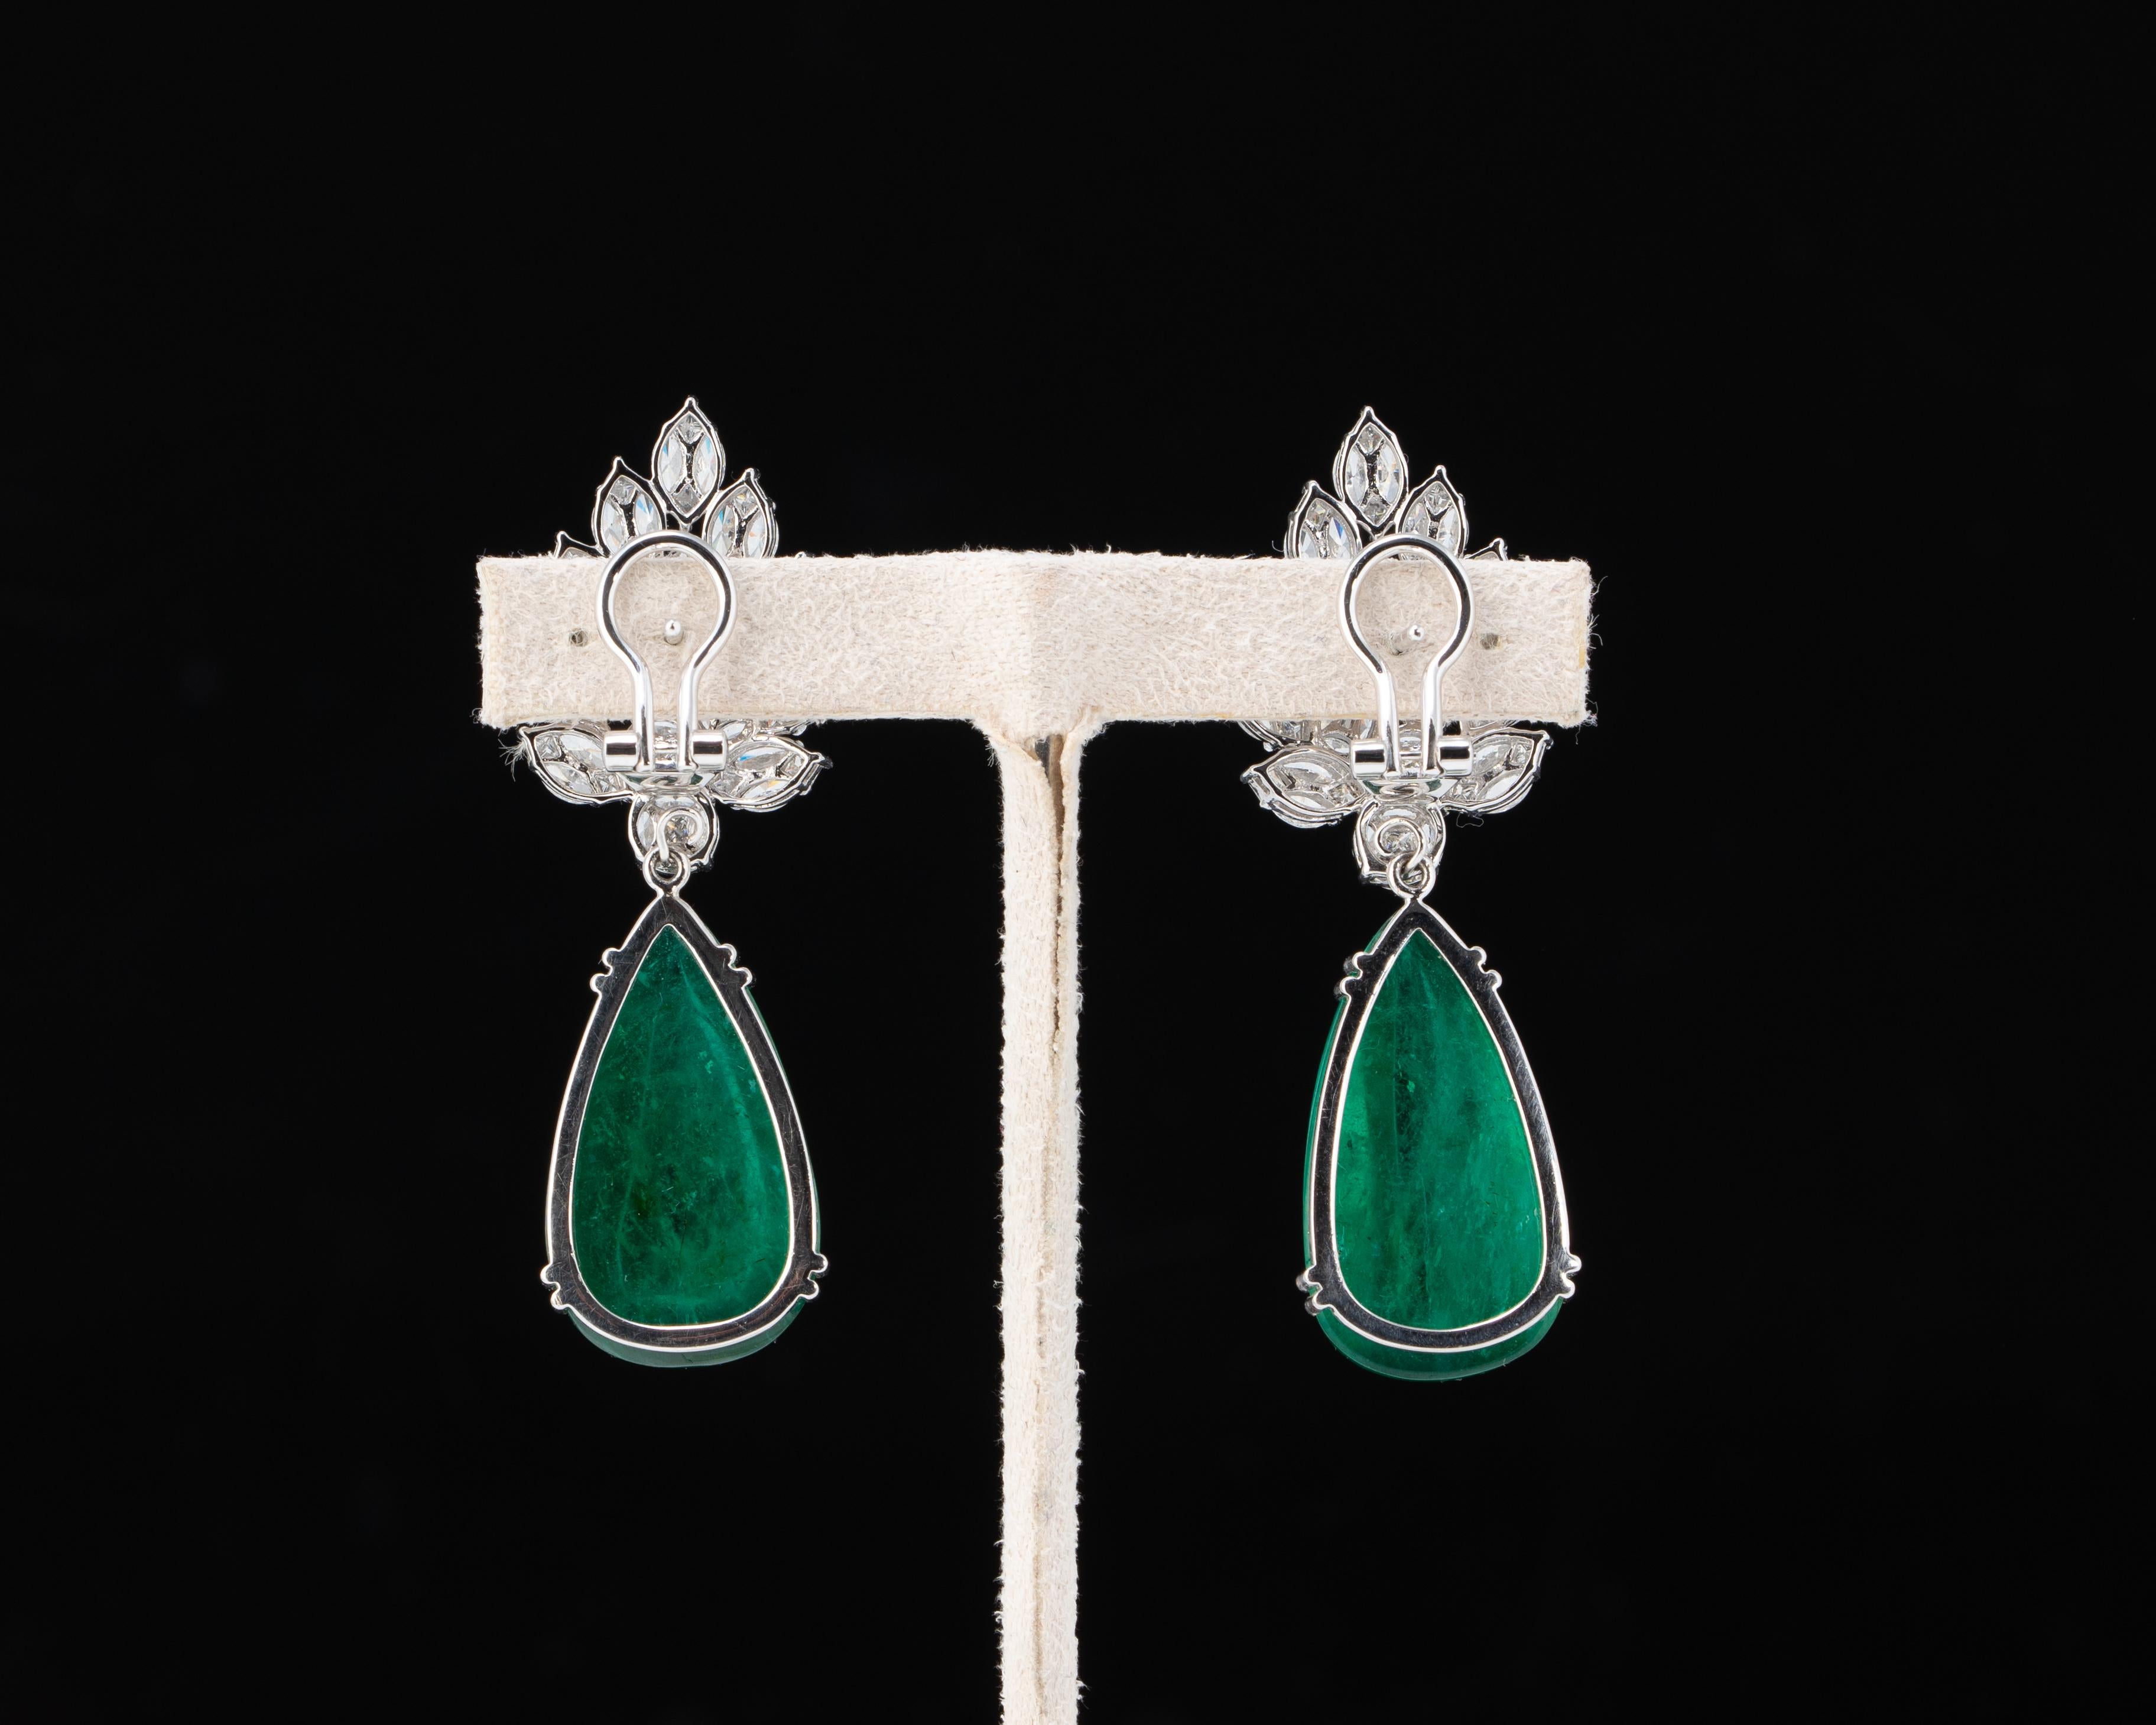 Make a statement with this exquisite pair of earrings, 44.32 carats of Zambian Emerald pear shapes hanging from a beautiful gold and white Diamond setting in 18K white gold. The Emeralds are clean, and transparent with few naturally occurring